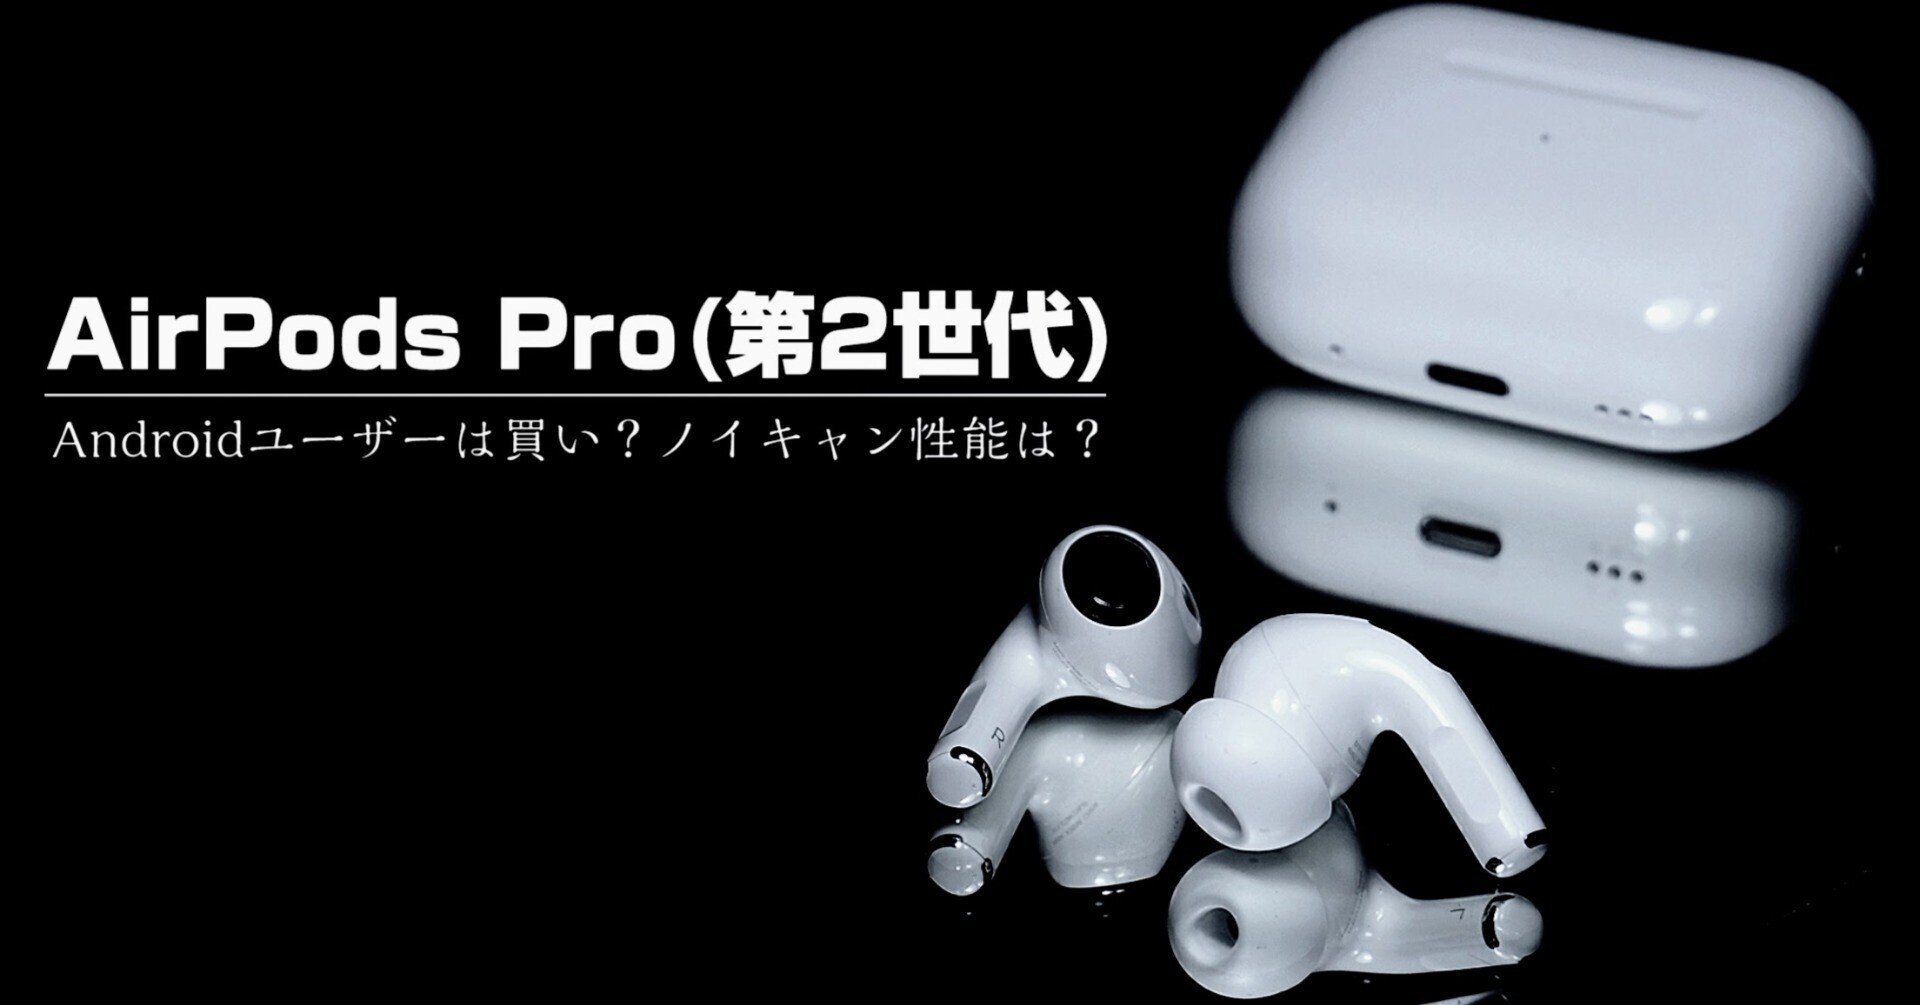 AirPods Pro2】AndroidユーザーはAirPods Pro第2世代を買うべきか